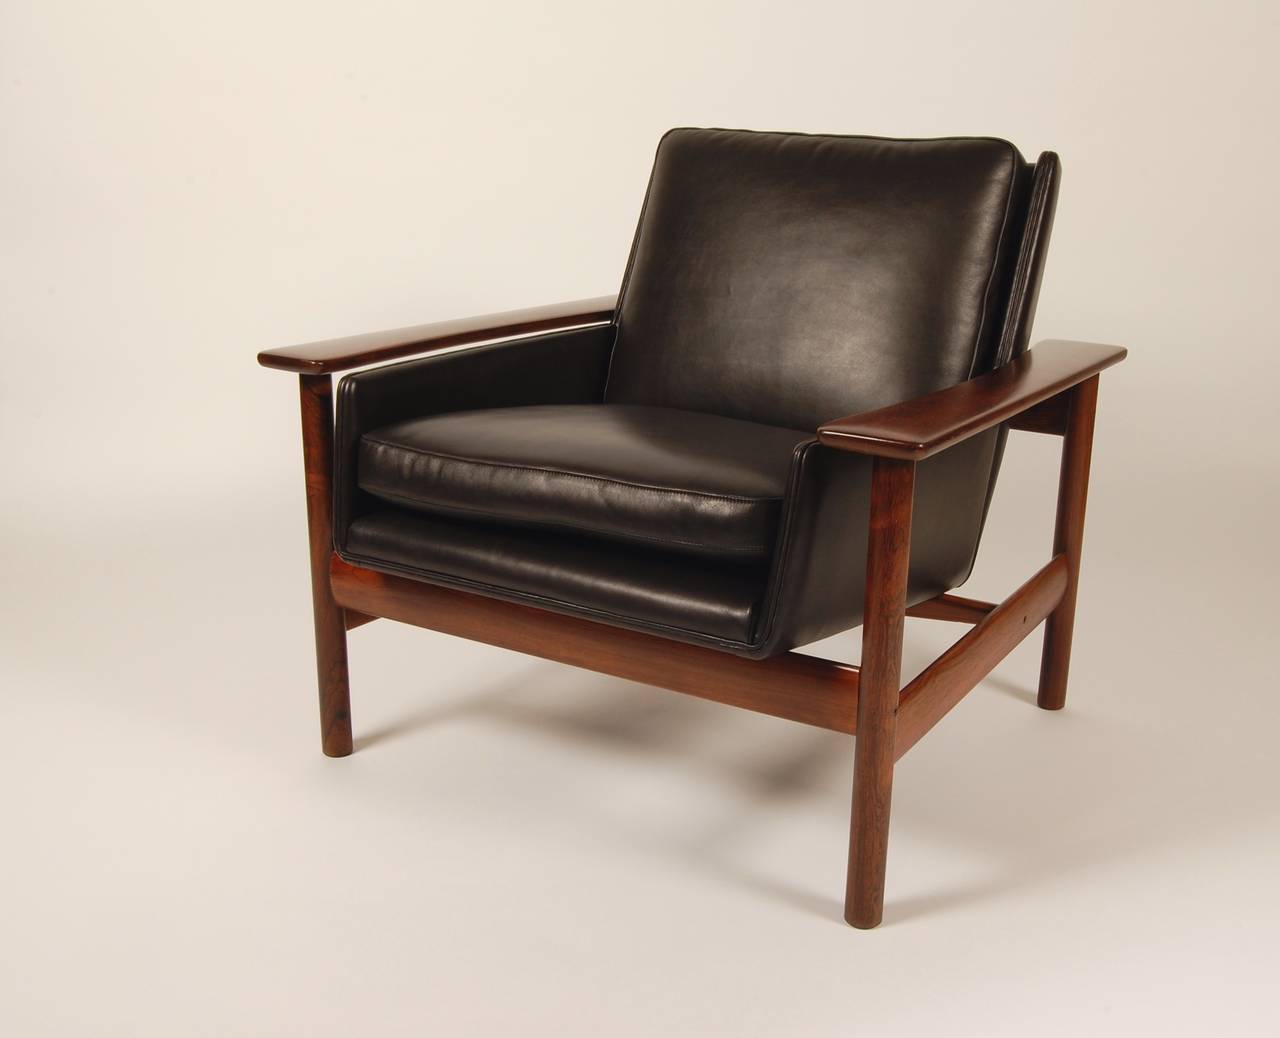 Rosewood and black leather lounge chair designed by Sven Ivar Dysthe for Dokka Mobler of Norway. The leather seat sits in the rosewood frame and is cradled by the sculptural paddle arms. Proffesionally restored to like new condition, using the